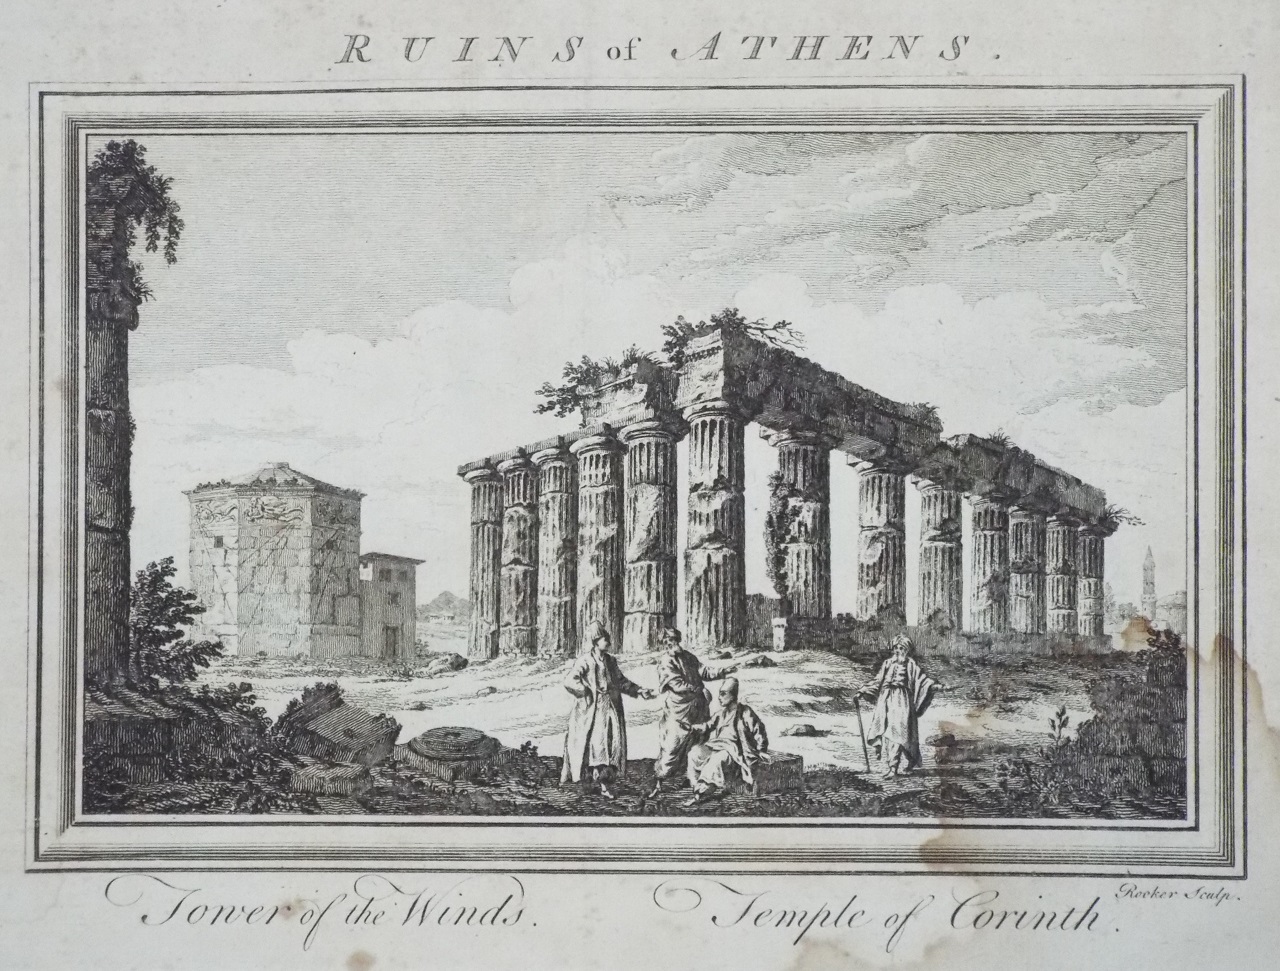 Print - Ruins of Athens. Tower of the Winds. Temple of Corinth. - 